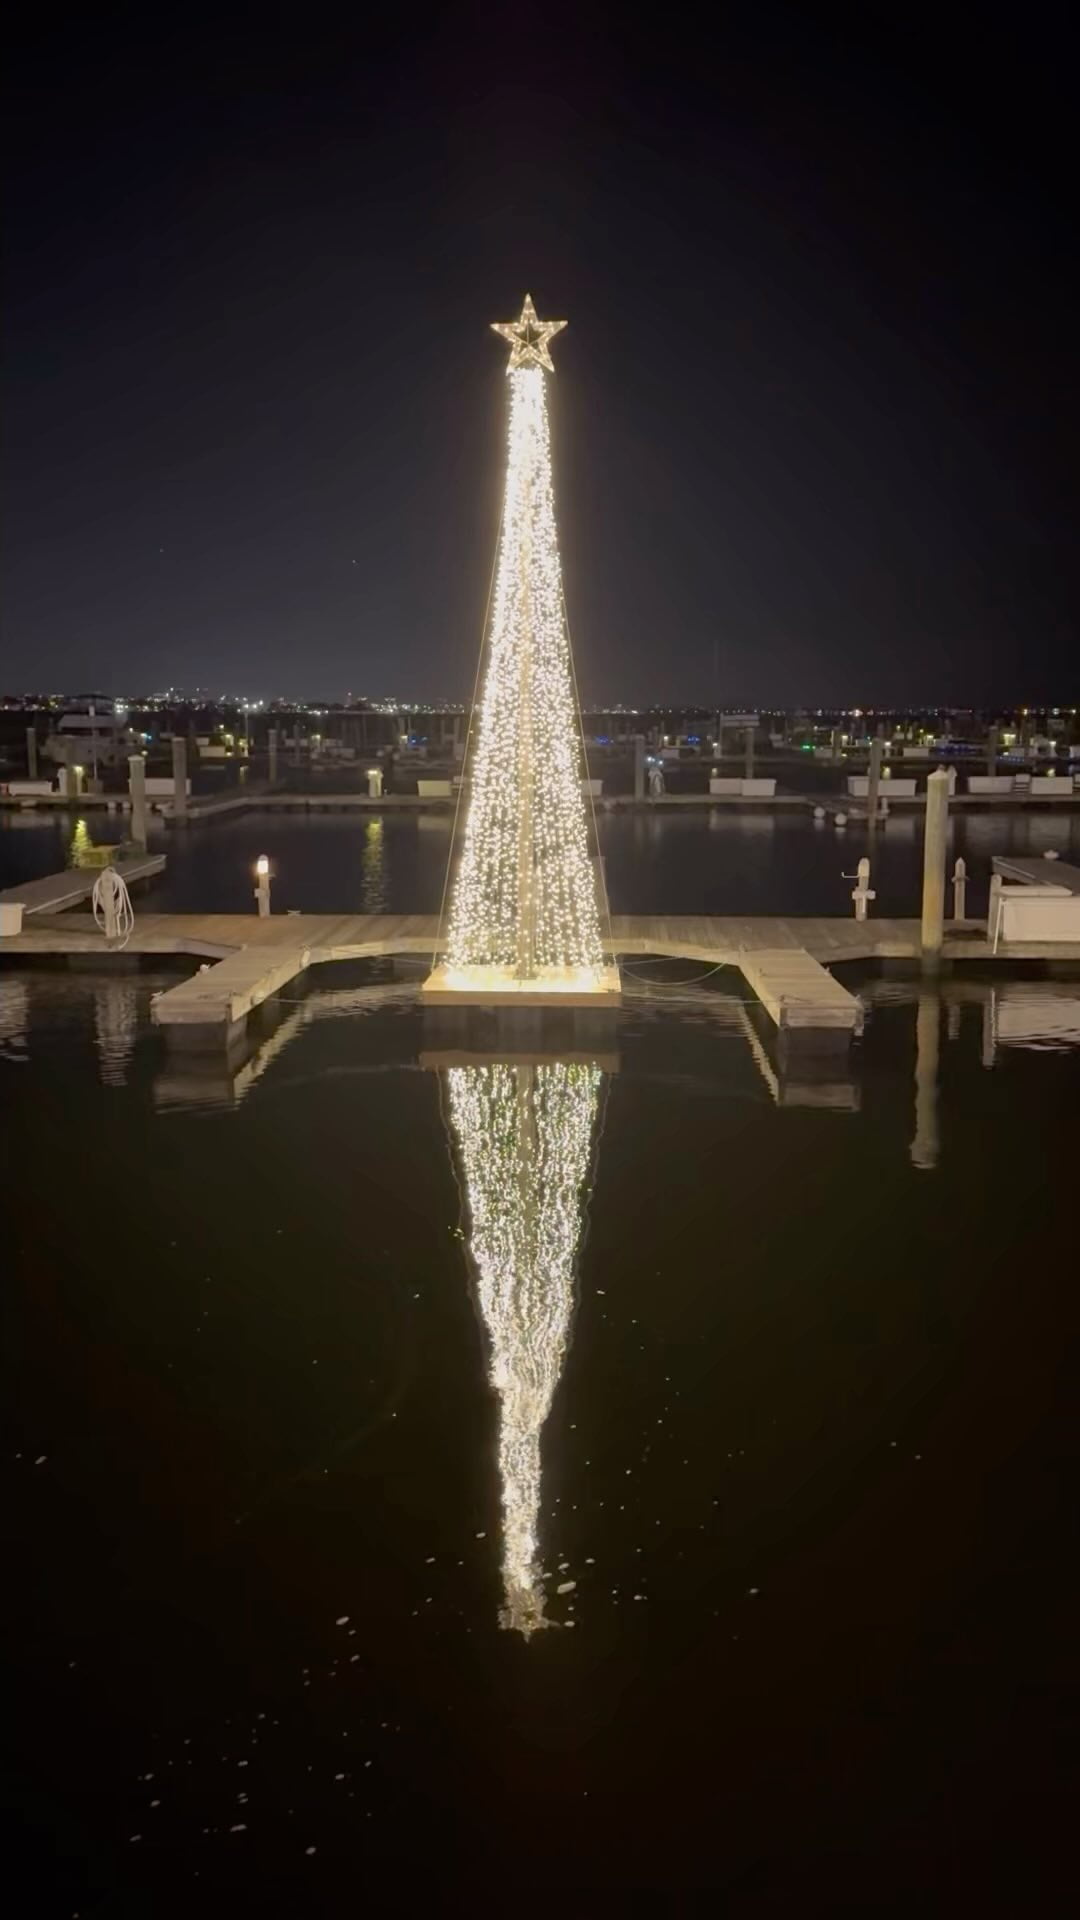 Marina Bay wearing its holiday best! Fun fact: did you know that the businesses and restaurants do stay open year round and don’t just close for the year on Sept 1?Head down to the boardwalk to take a holiday stroll and support small business! They need your help during the off season!